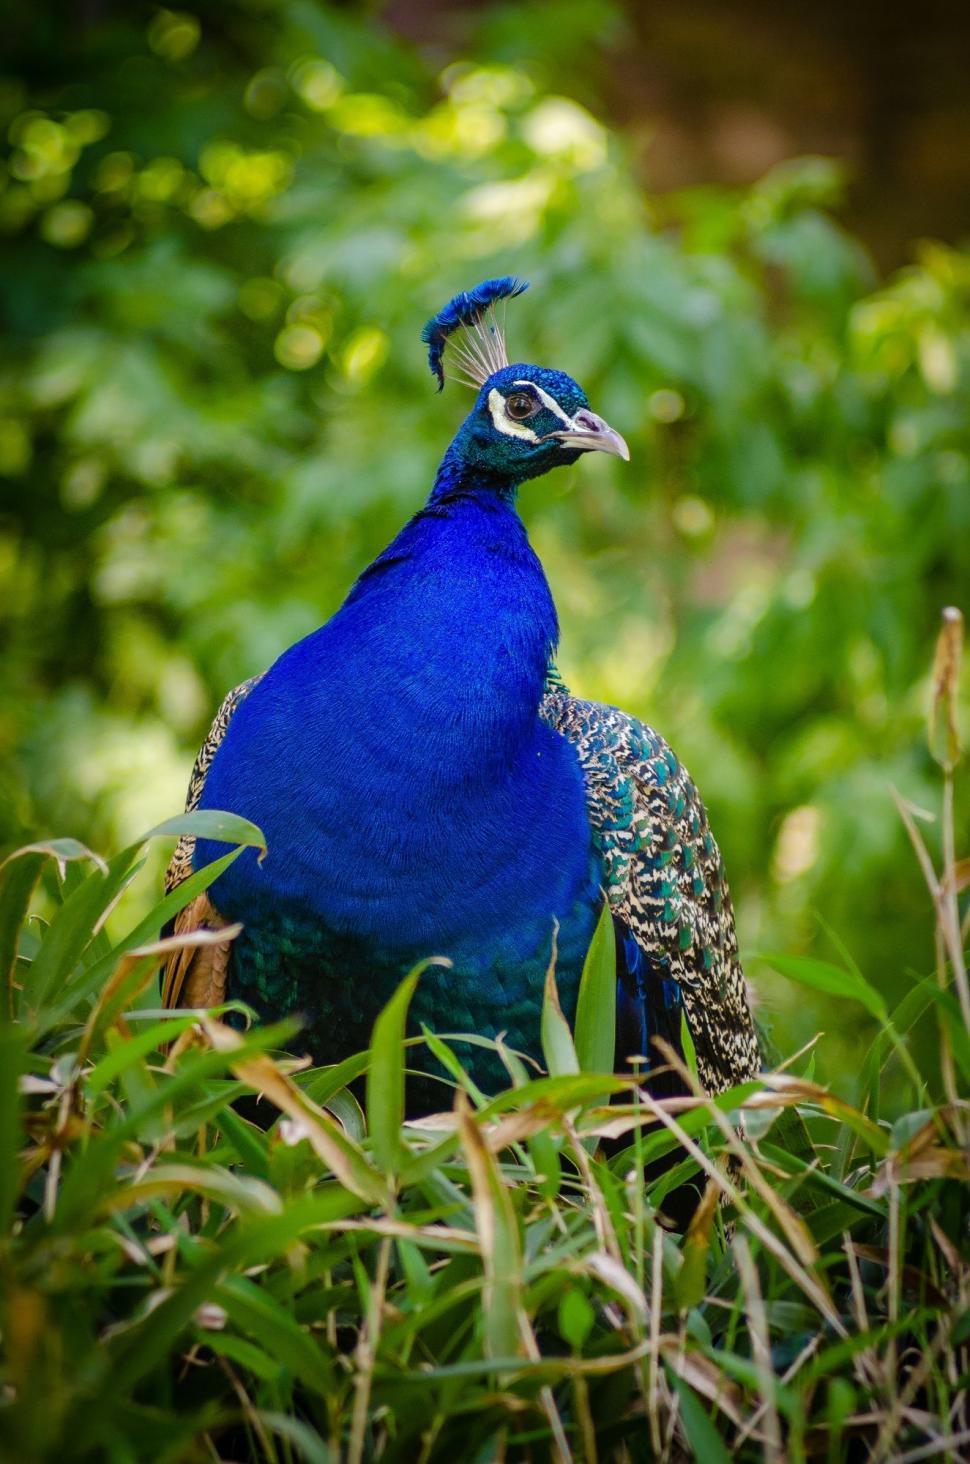 Free Image of Peacock and green grass 